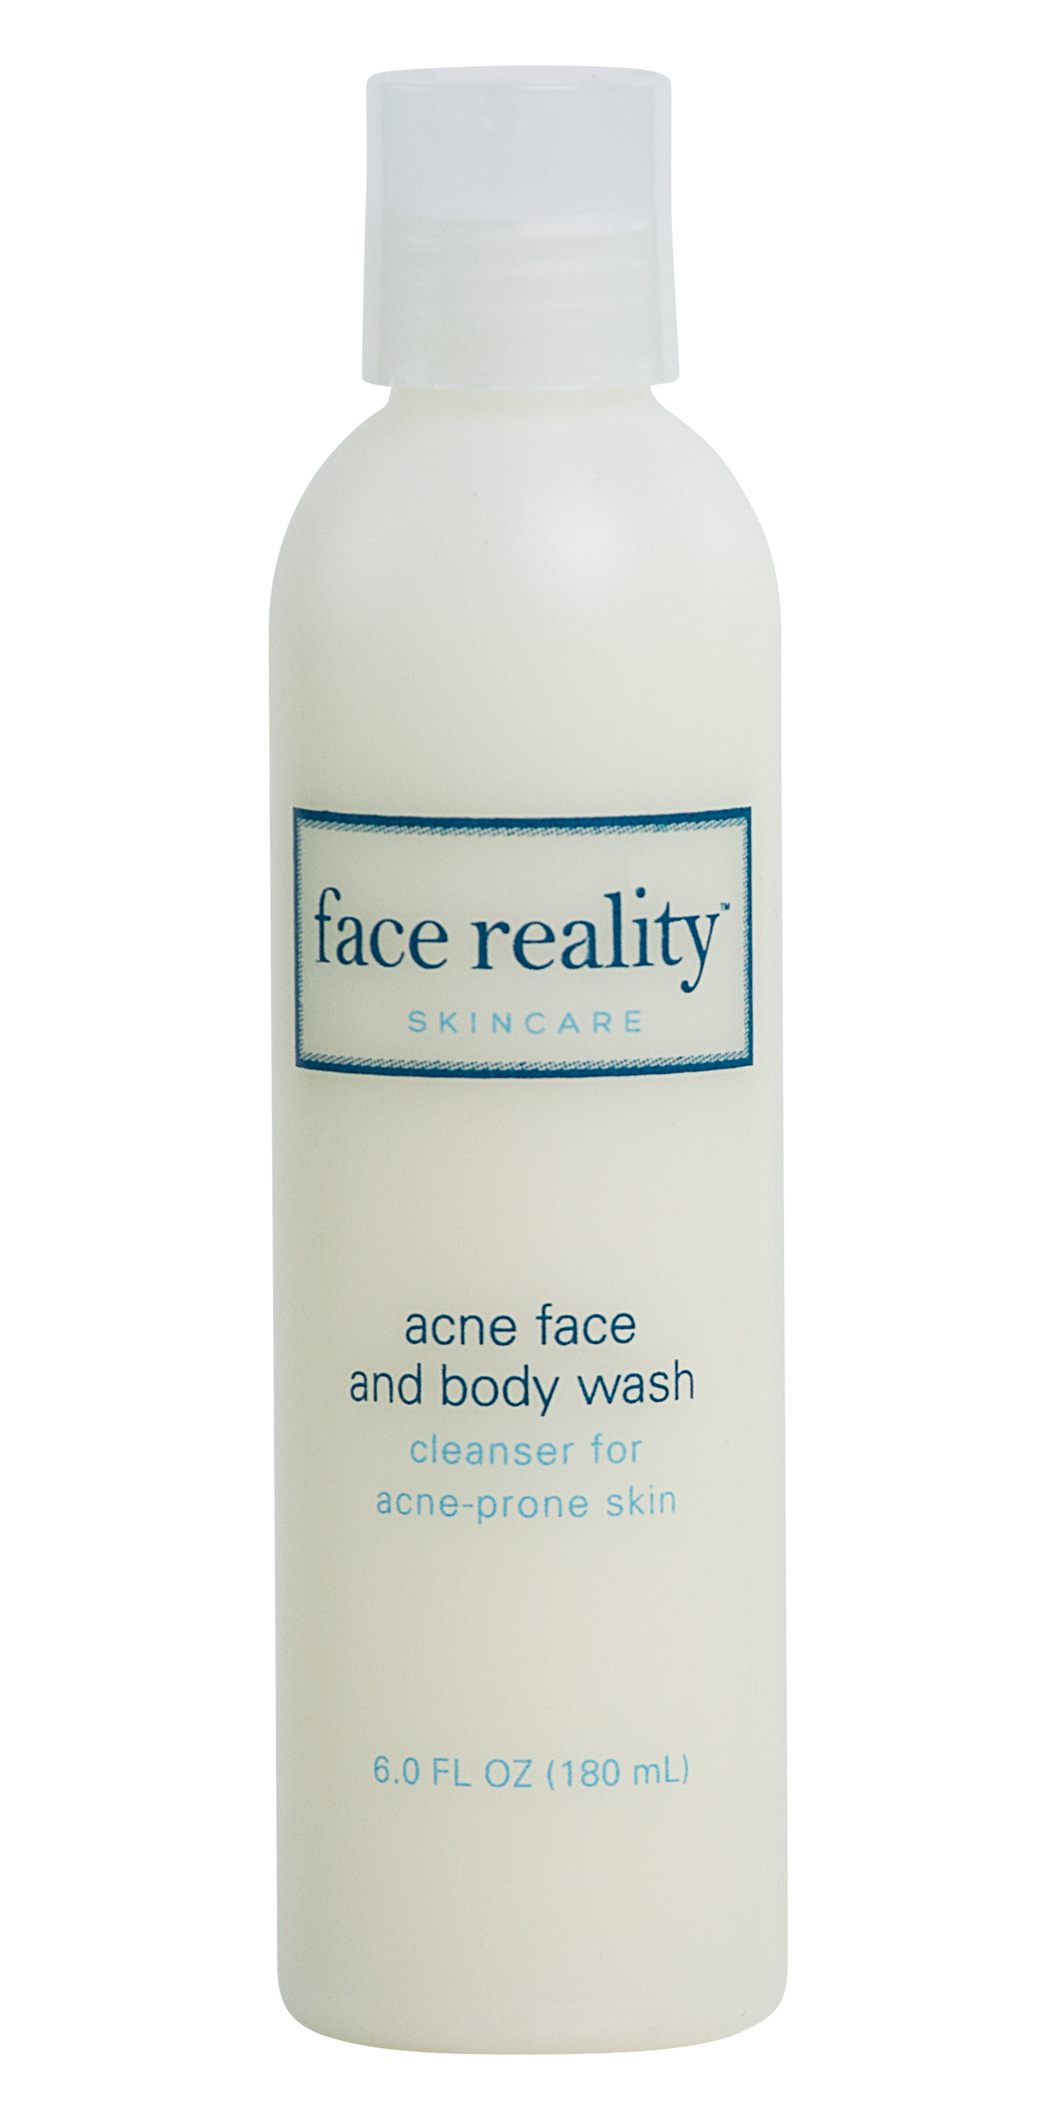 Acne Face and Body Wash